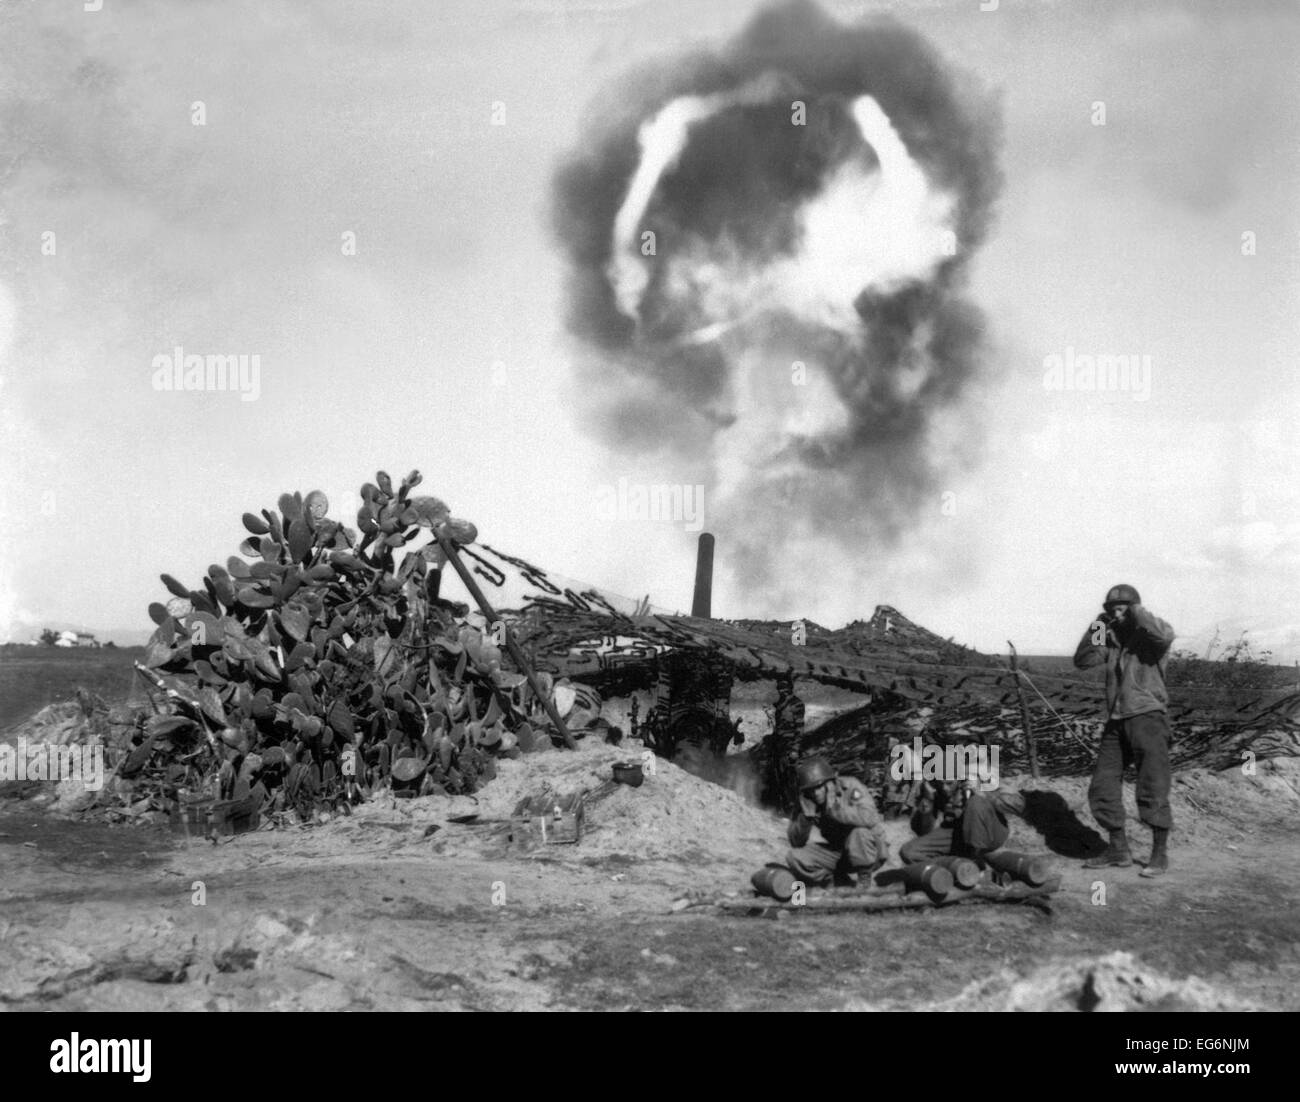 A 155mm gun fired by U.S. troops in the Nettuno area of the Anzio Beachhead. German troops in the hills east of Anzio launched Stock Photo